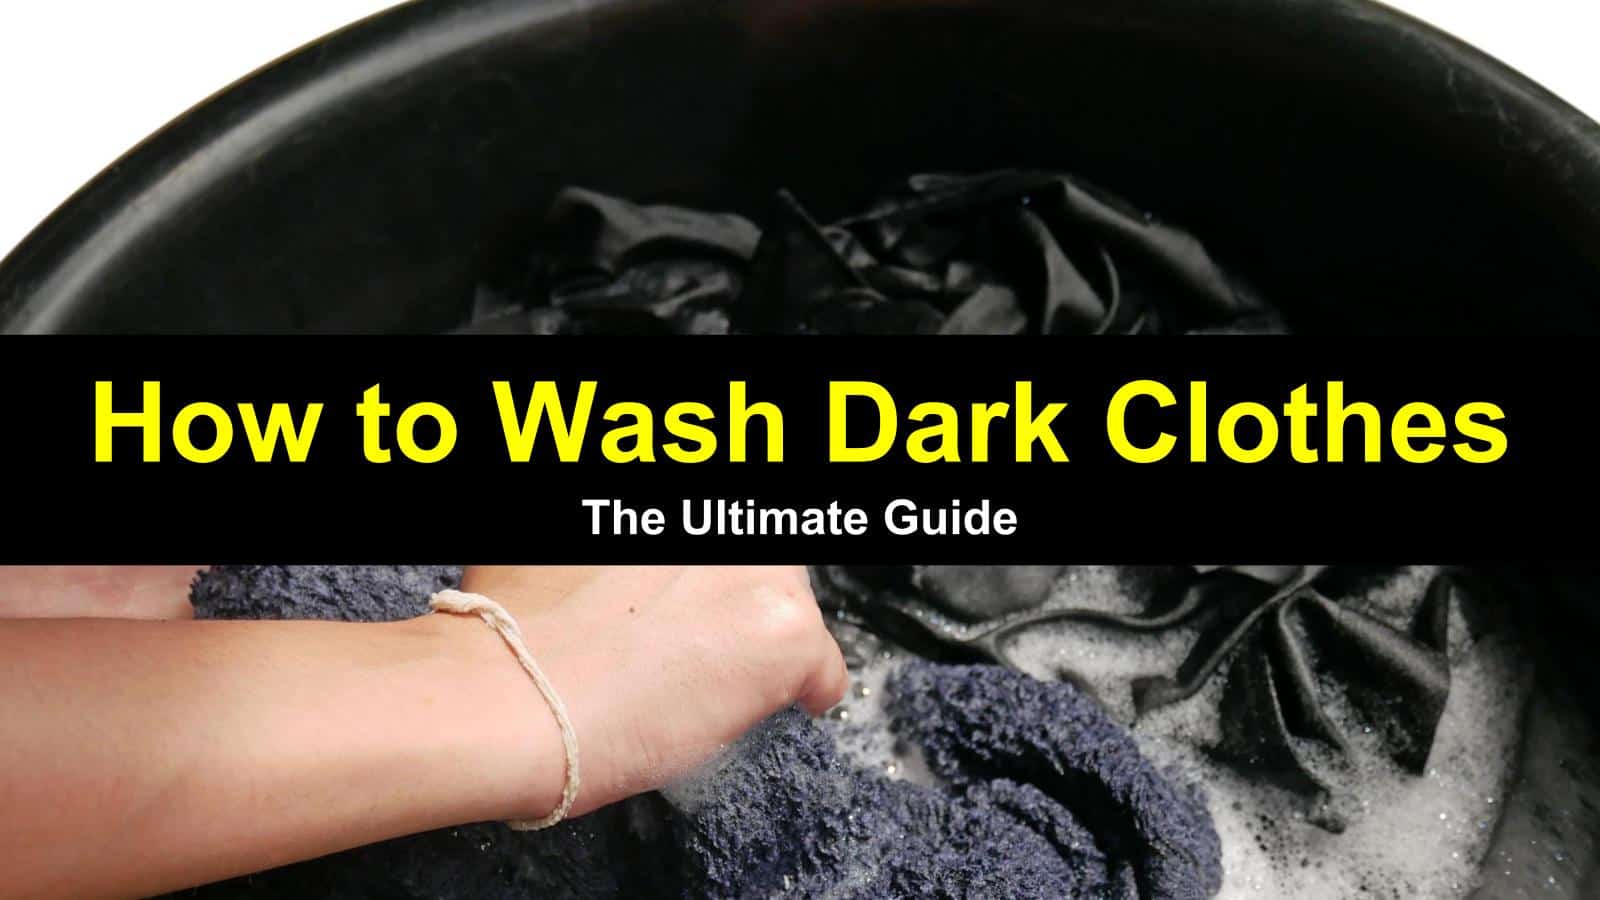 wash dark clothes in hot or cold